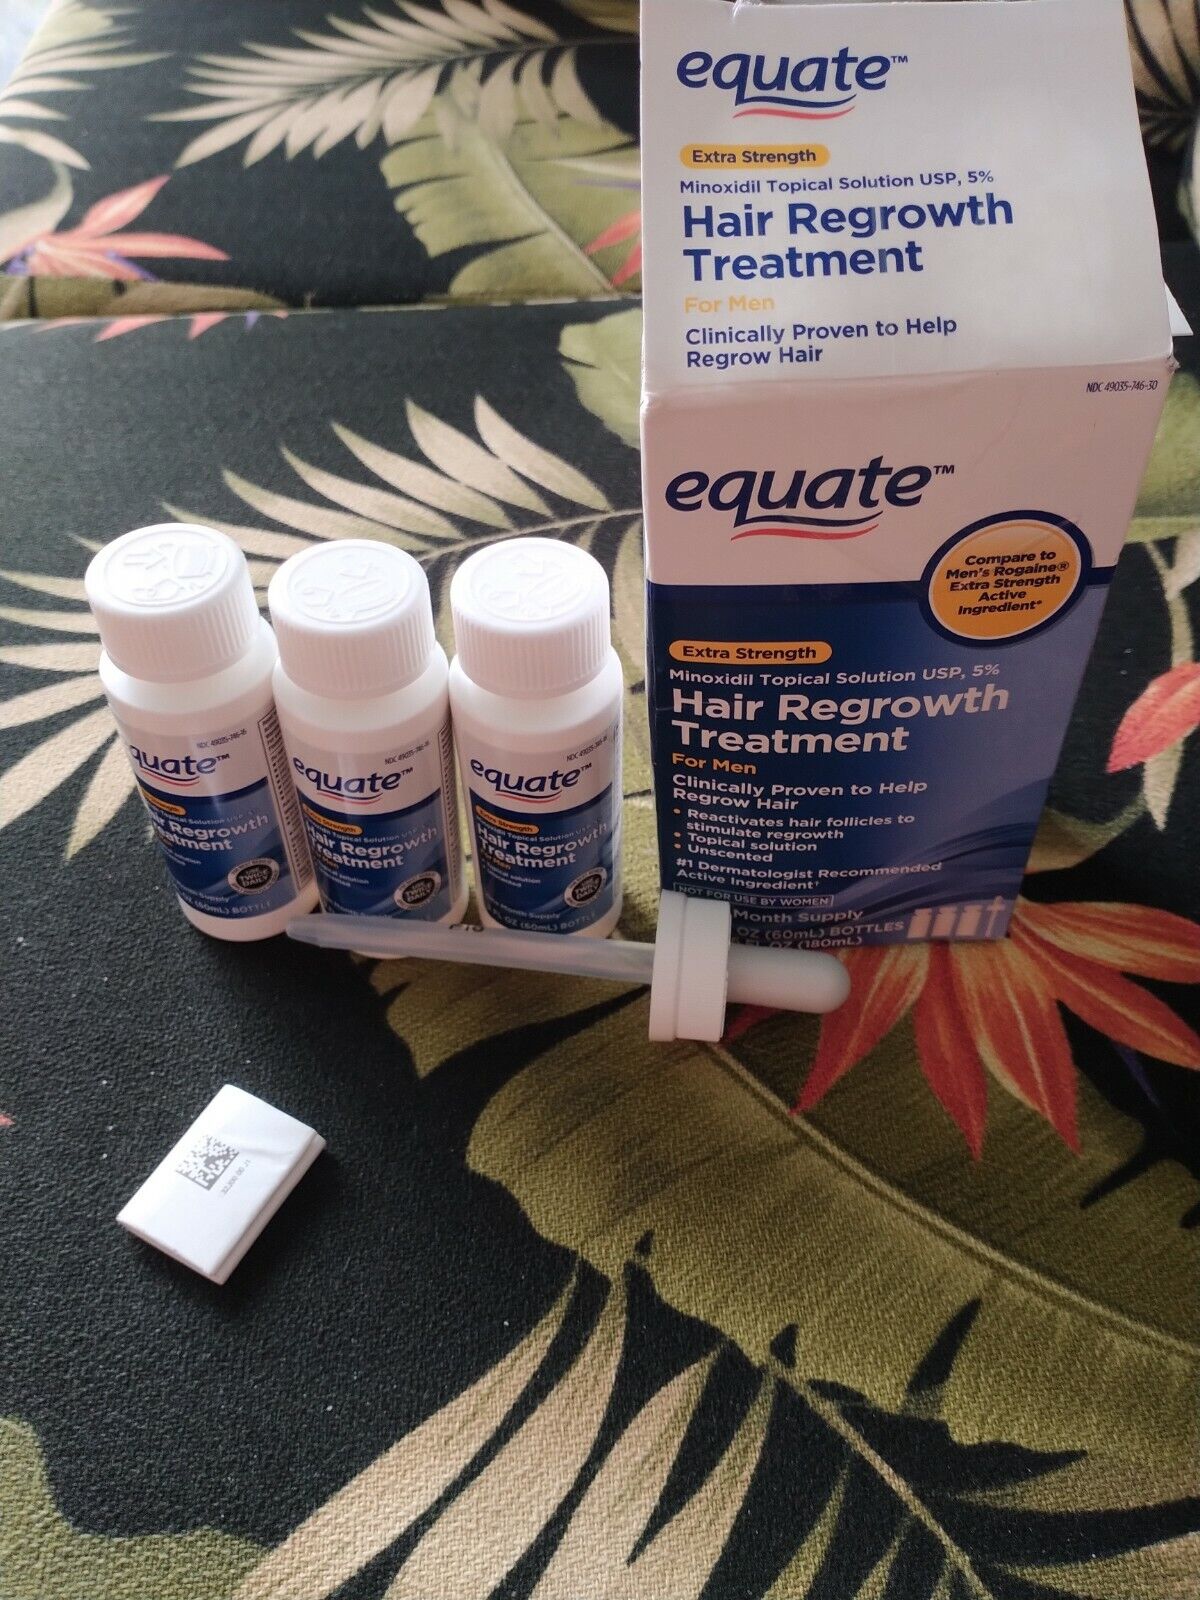 Equate Hair Regrowth Treatment for Men,Topical Solution USP 5%, open box, |  eBay